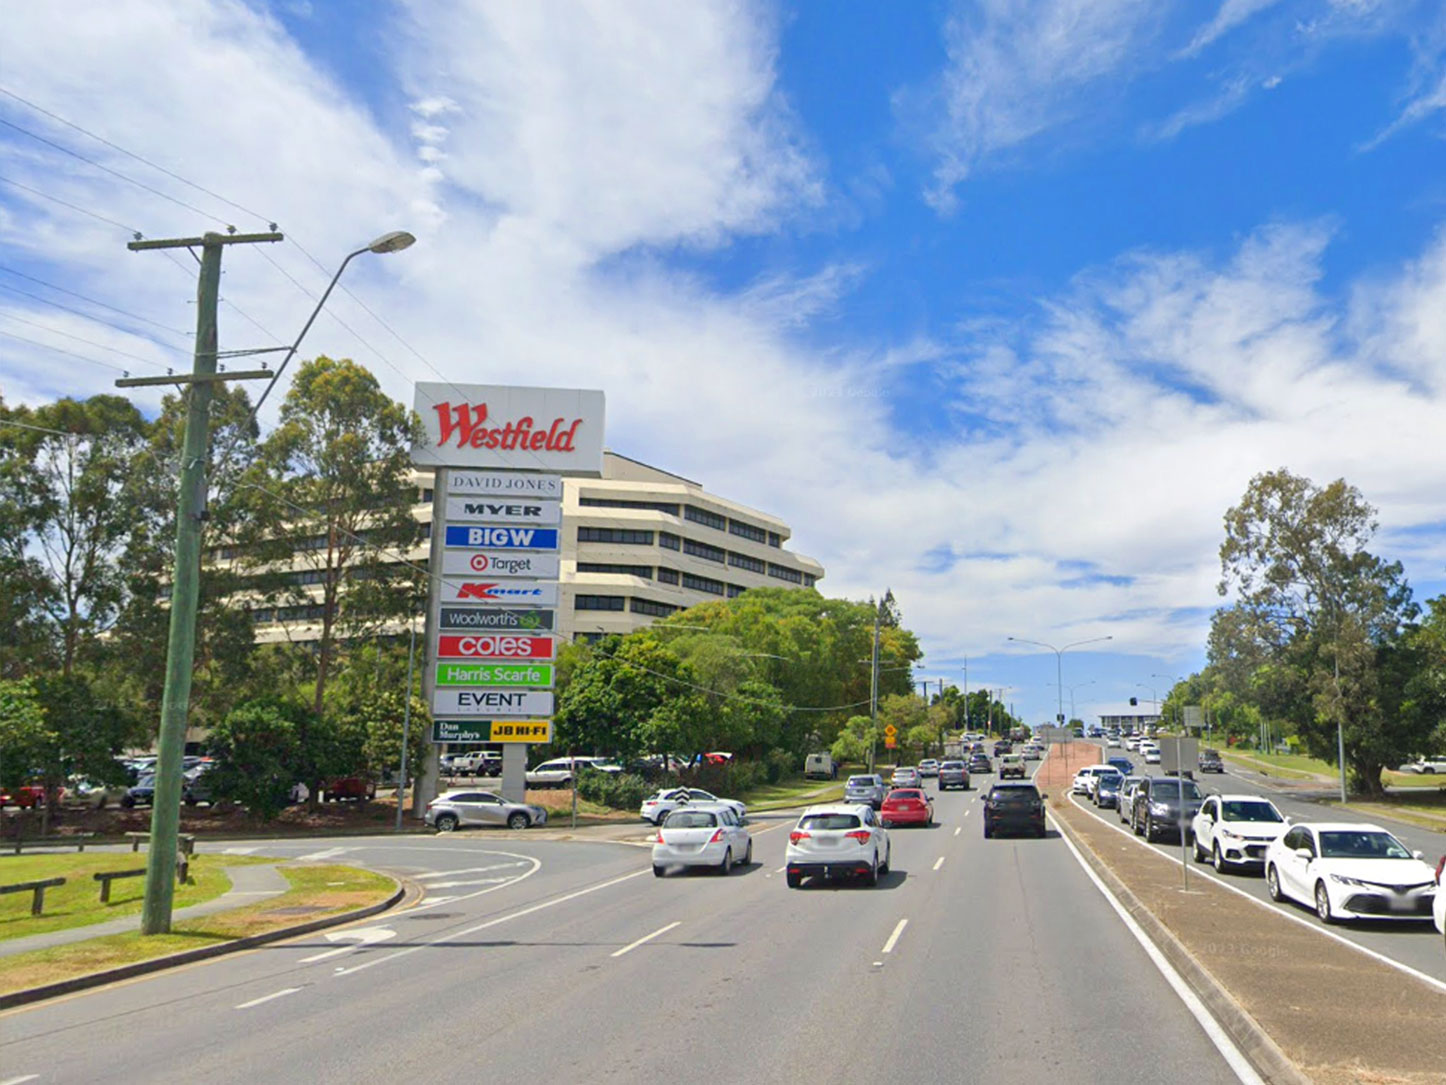 Streetvire of the Chermside Shopping Centre sign